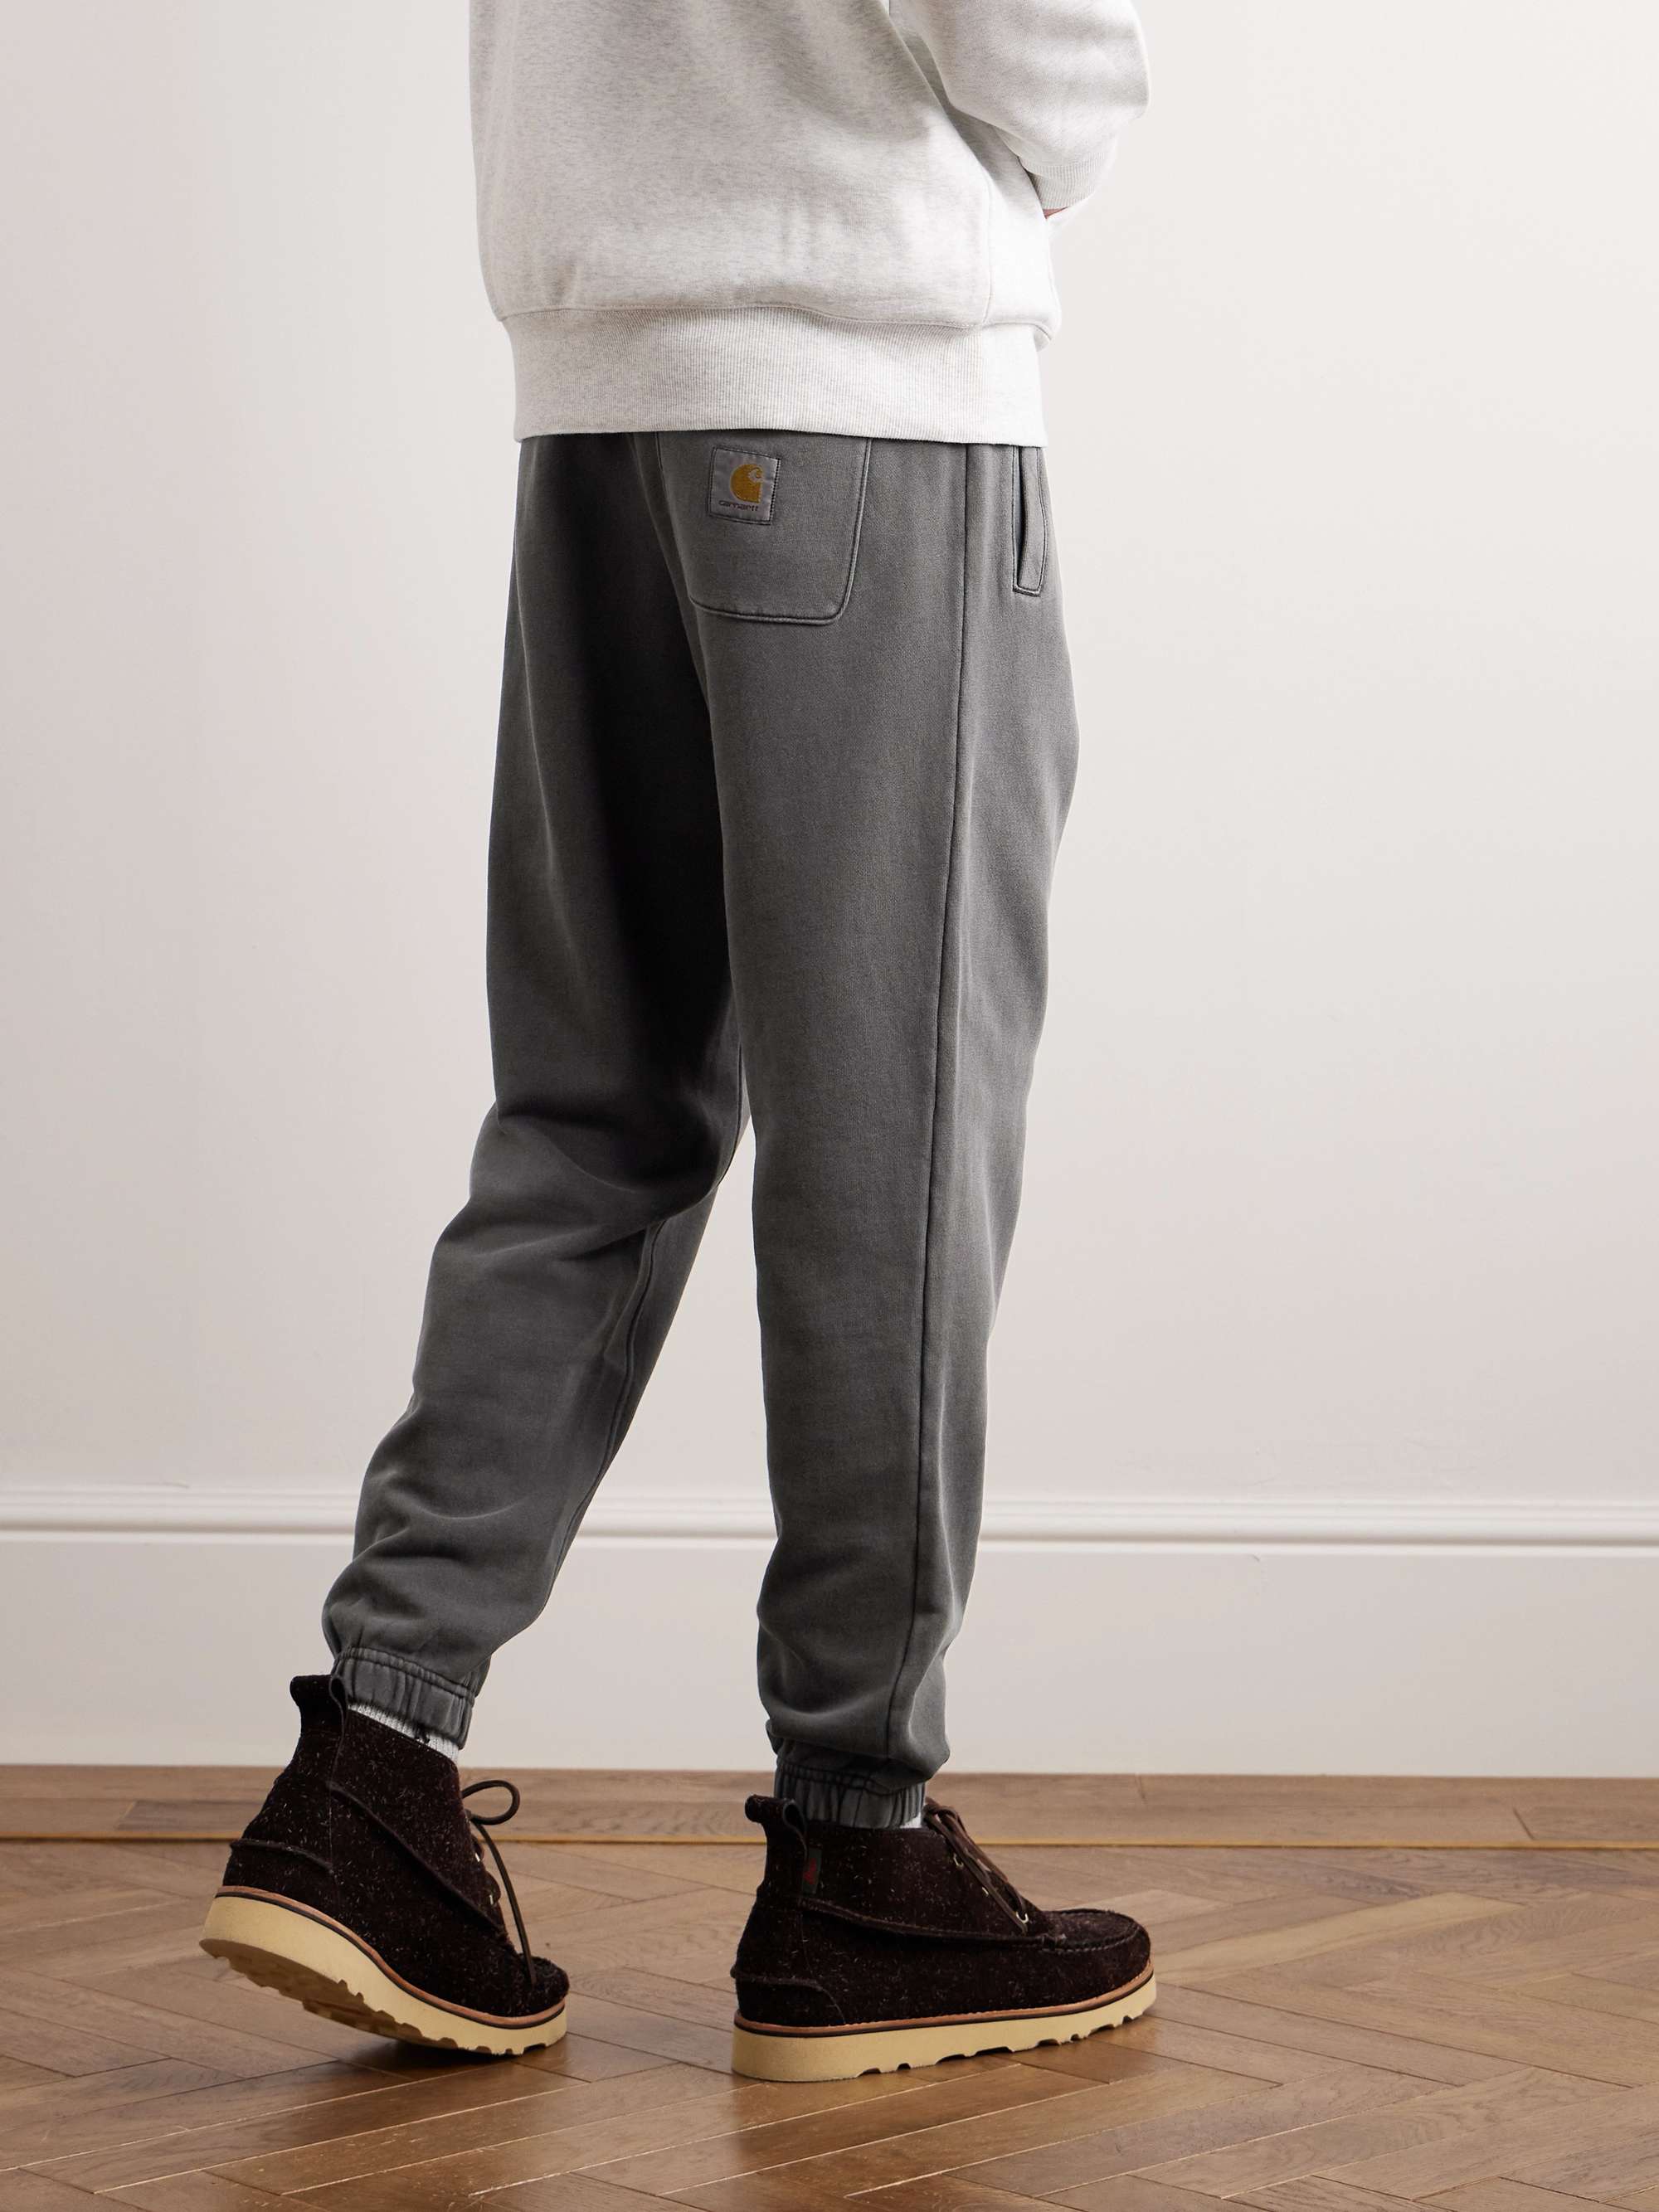 CARHARTT WIP Nelson Tapered Garment-Dyed Cotton-Jersey Sweatpants